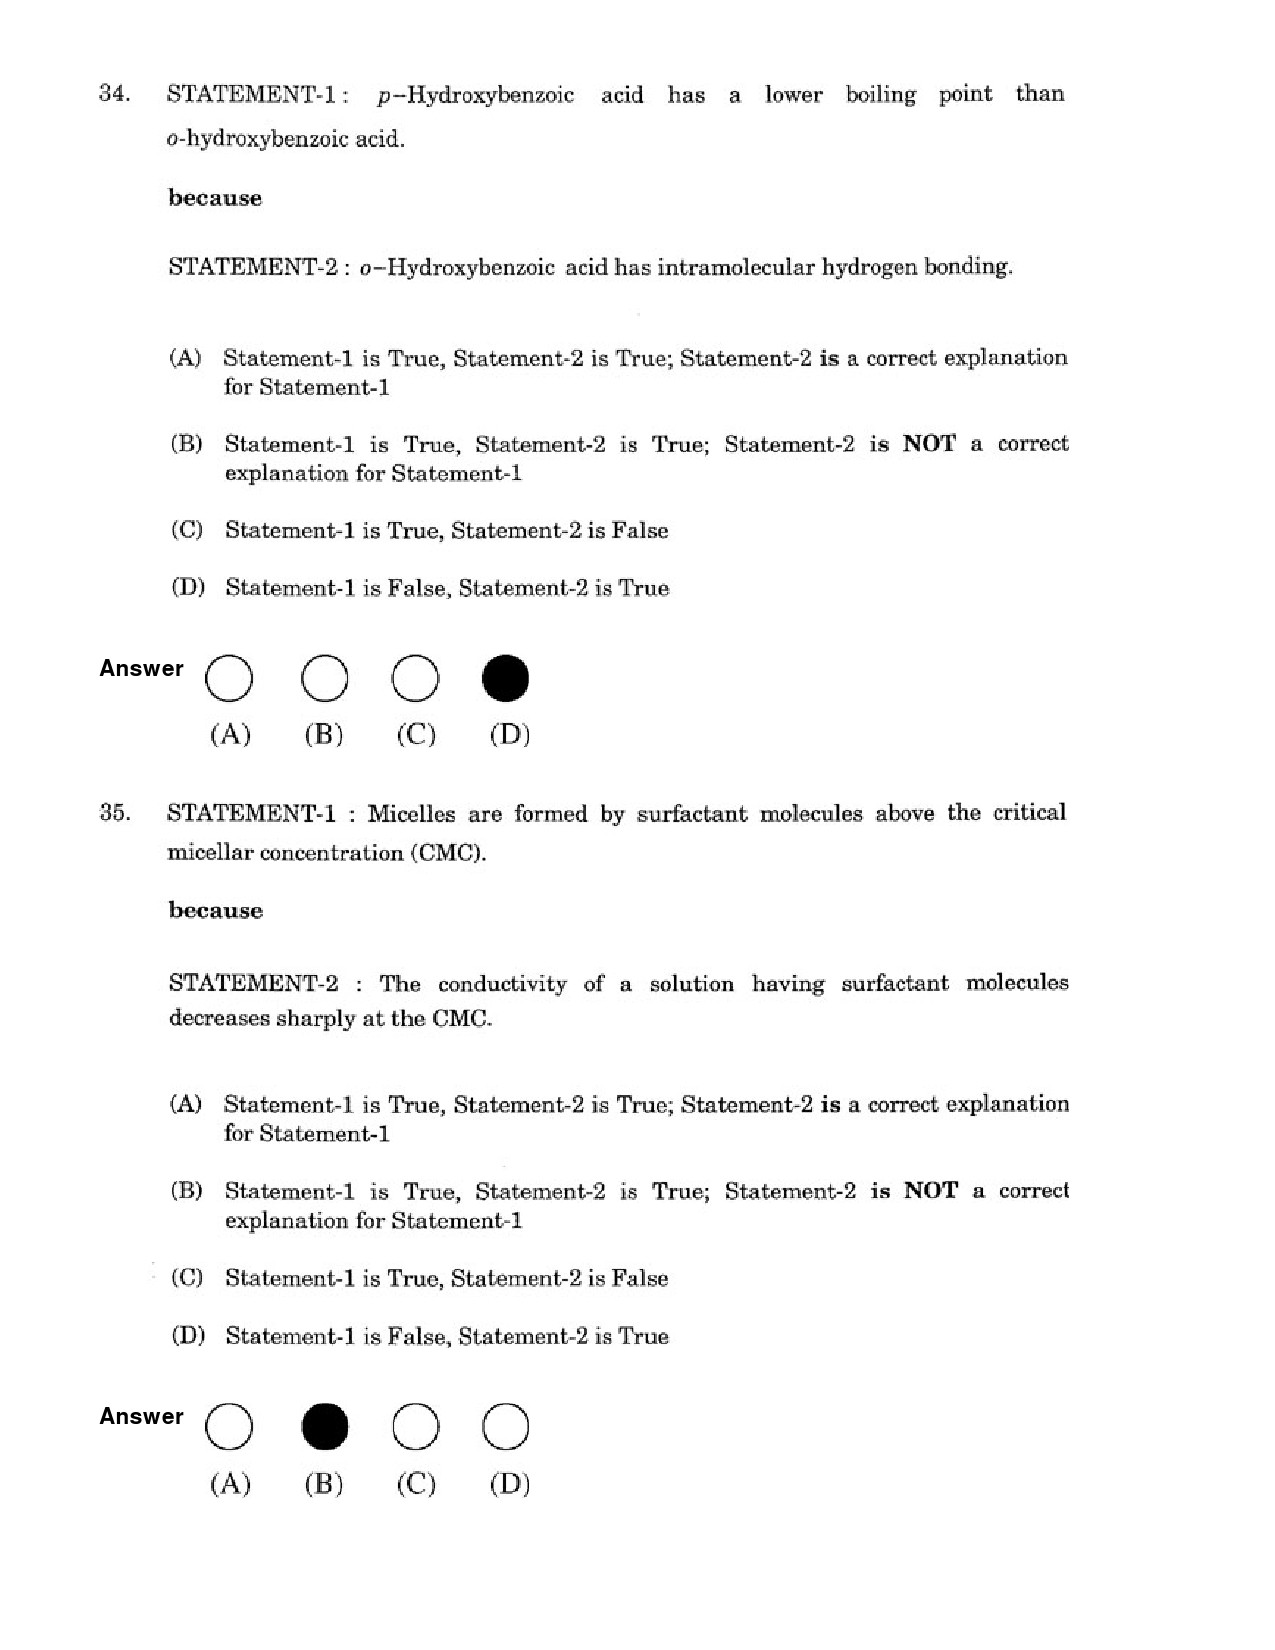 JEE Exam Question Paper 2007 Paper 1 15